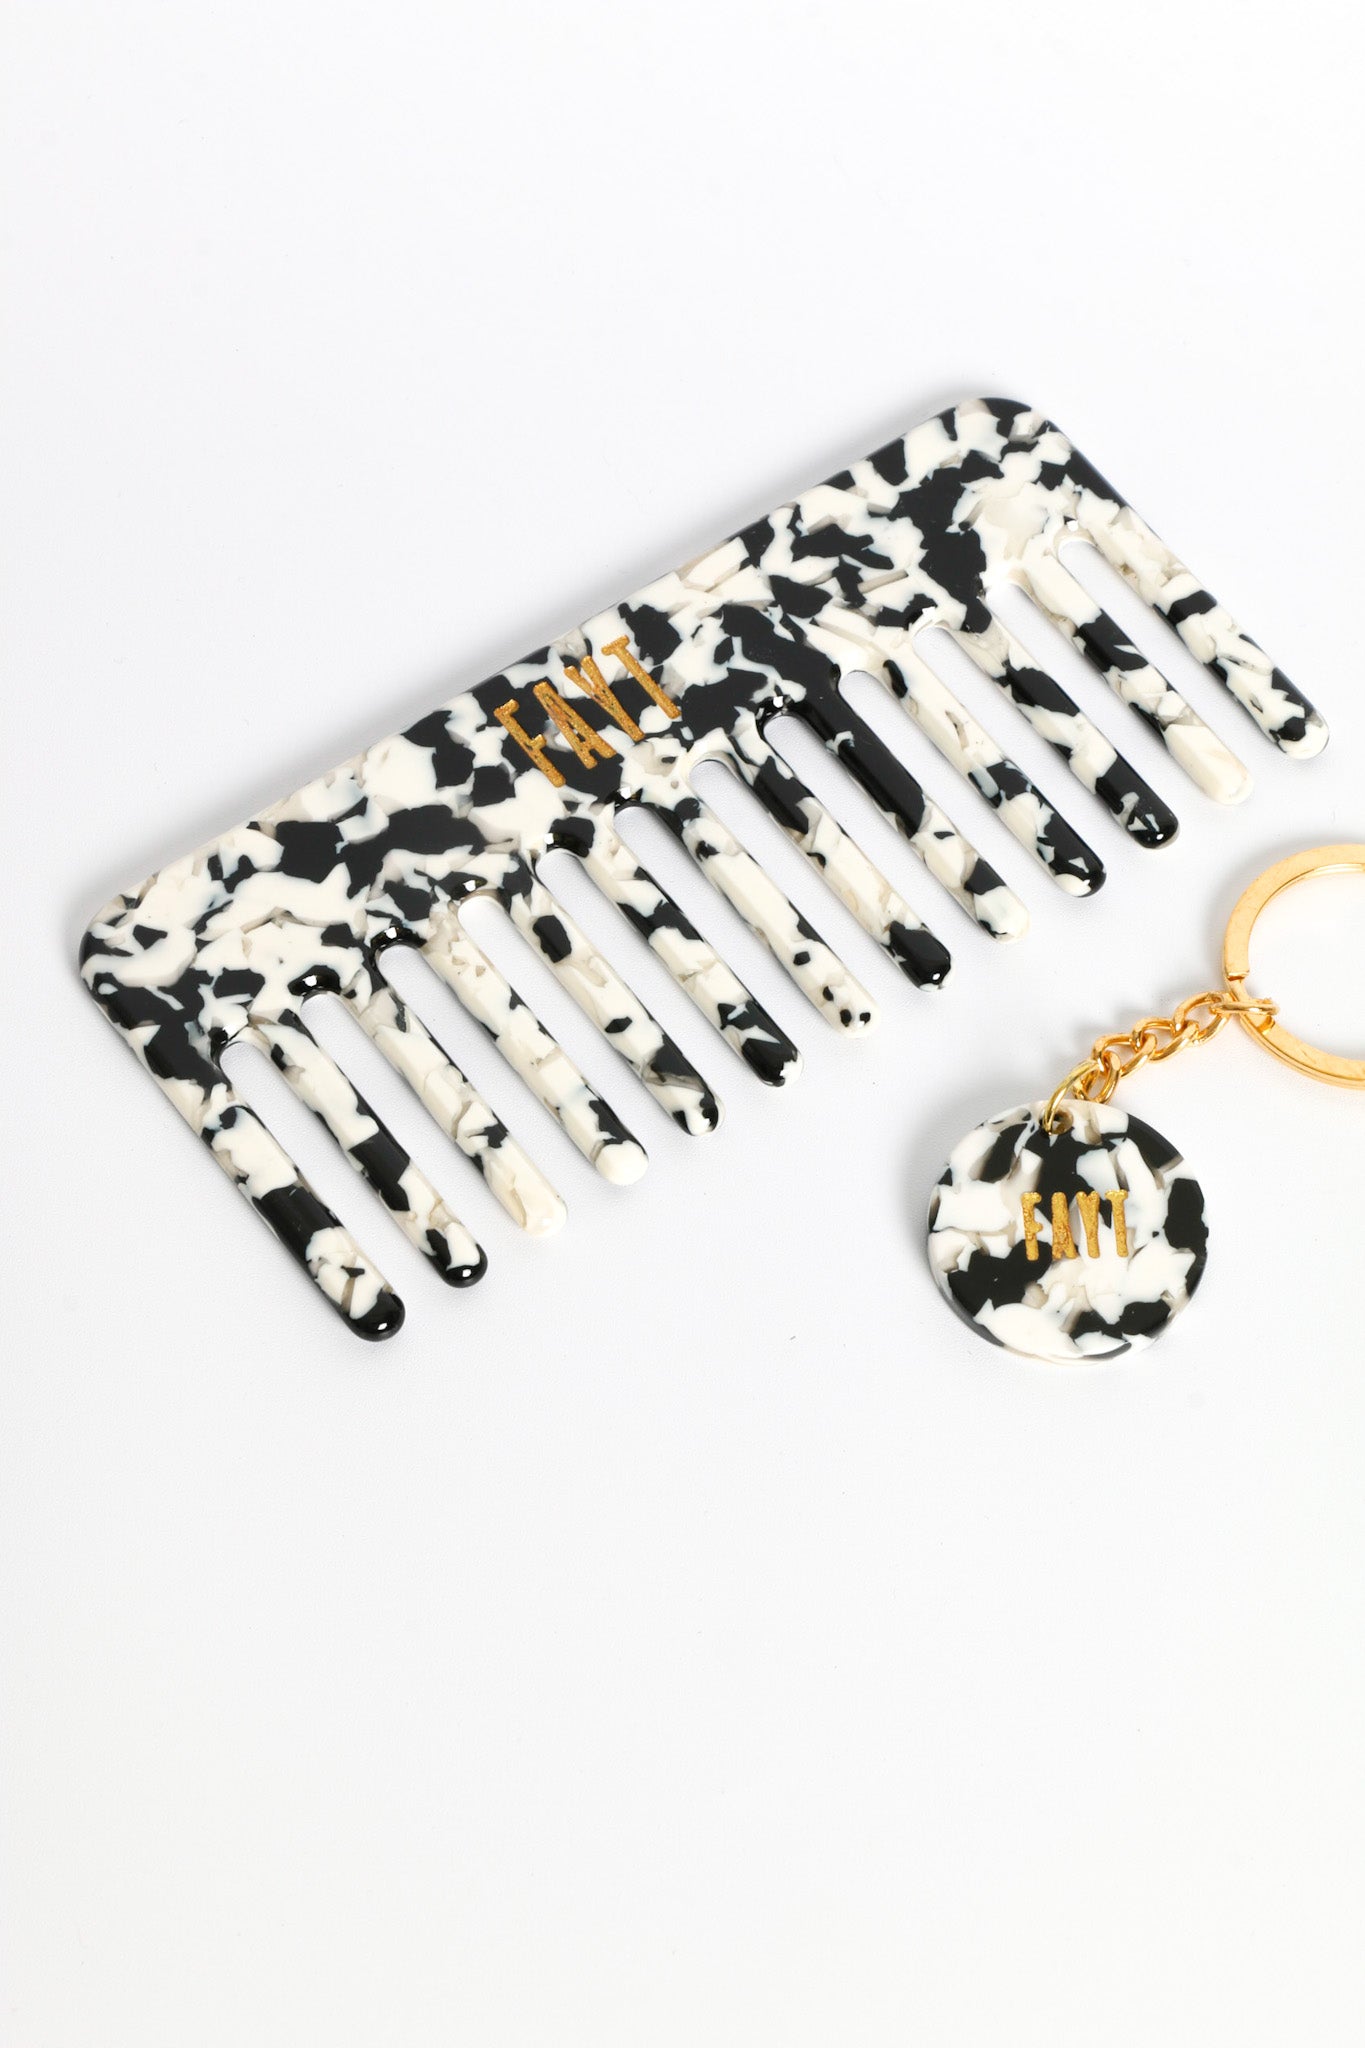 COMB AND KEYRING DUO MONOCHROME